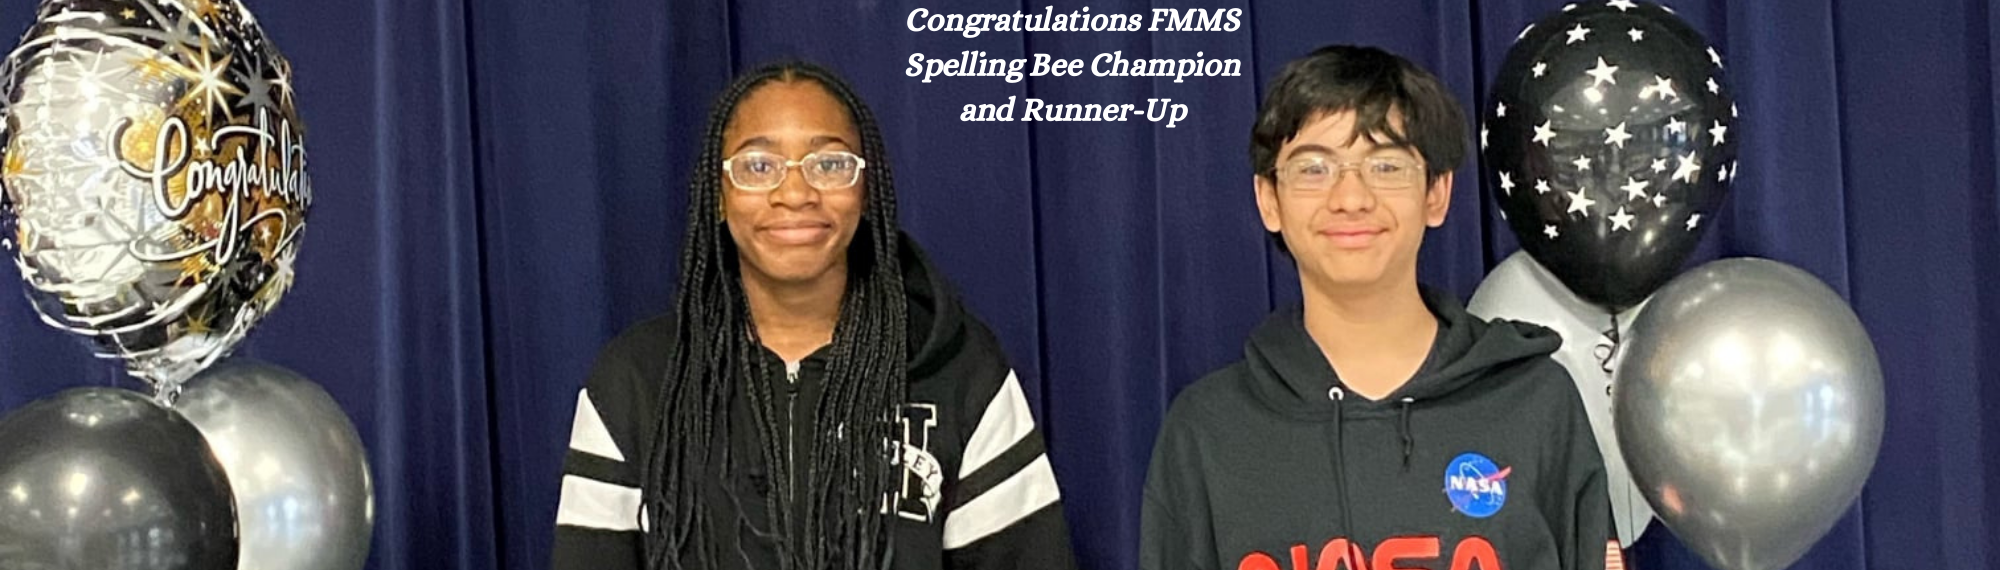 FMMS Spelling Bee Champion and Runner-Up